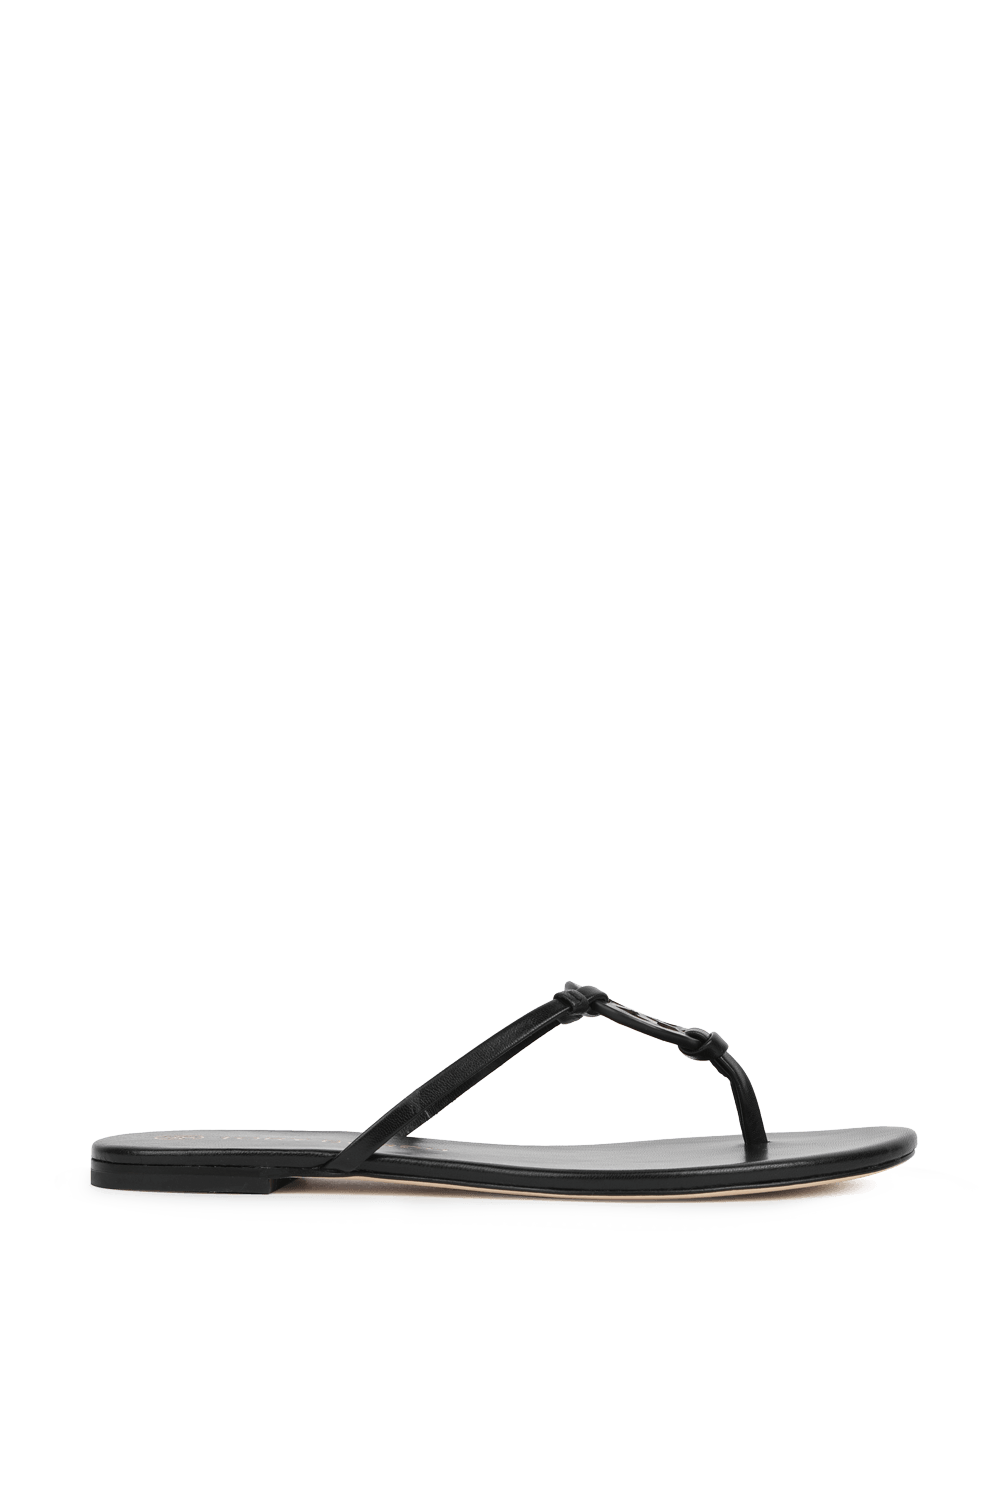 Miller Knotted Sandals in Black TORY BURCH